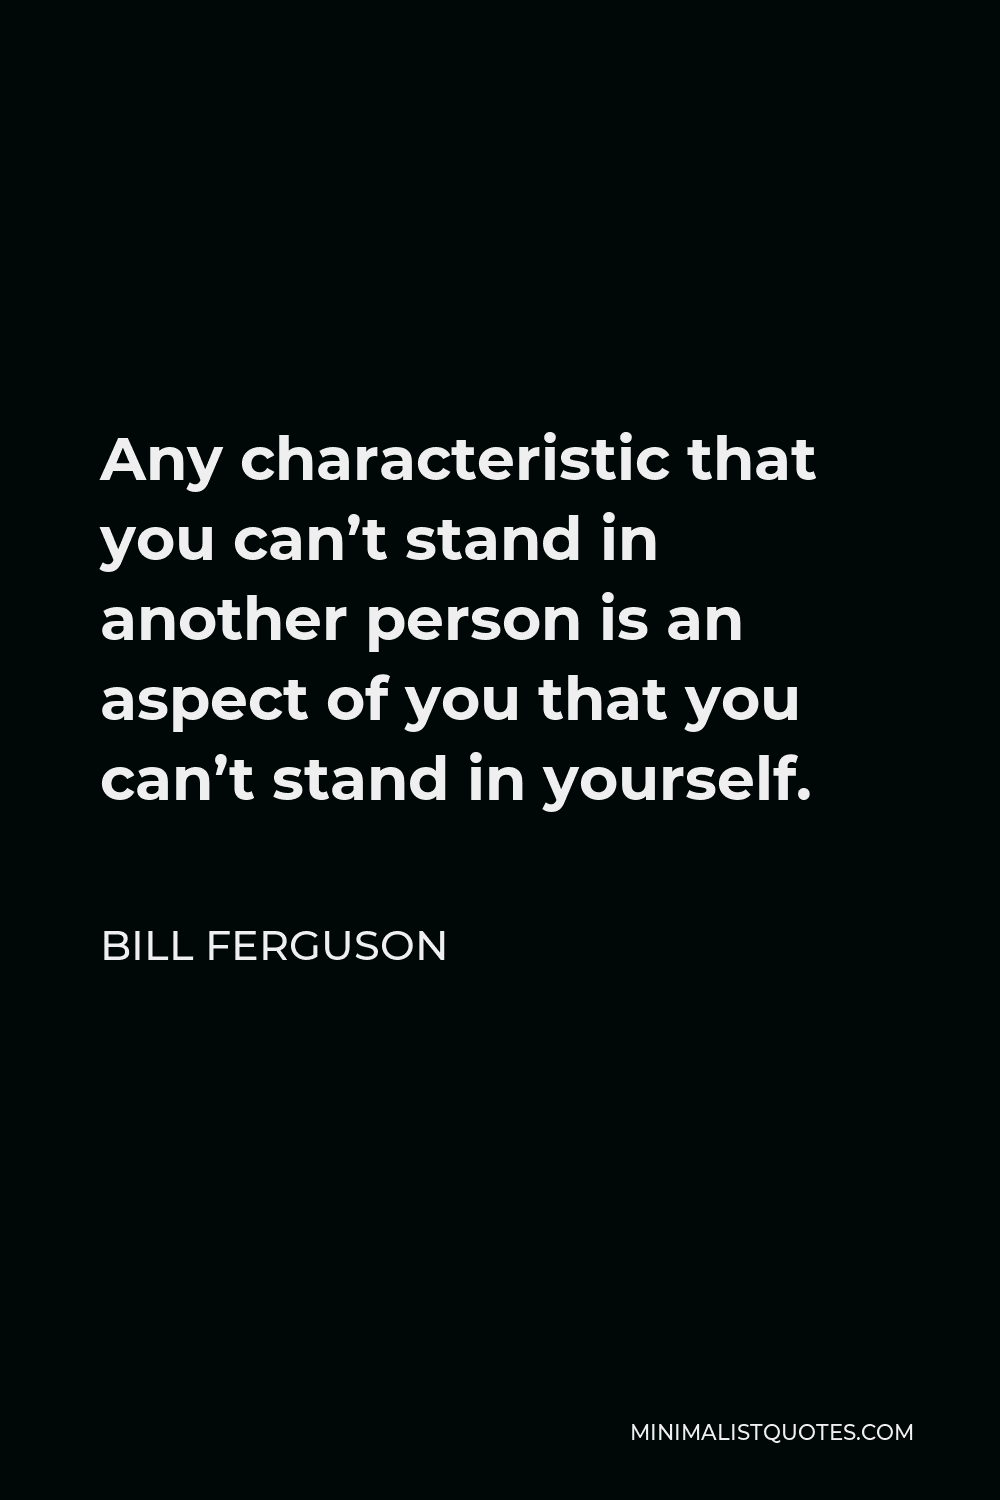 Bill Ferguson Quote - Any characteristic that you can’t stand in another person is an aspect of you that you can’t stand in yourself.